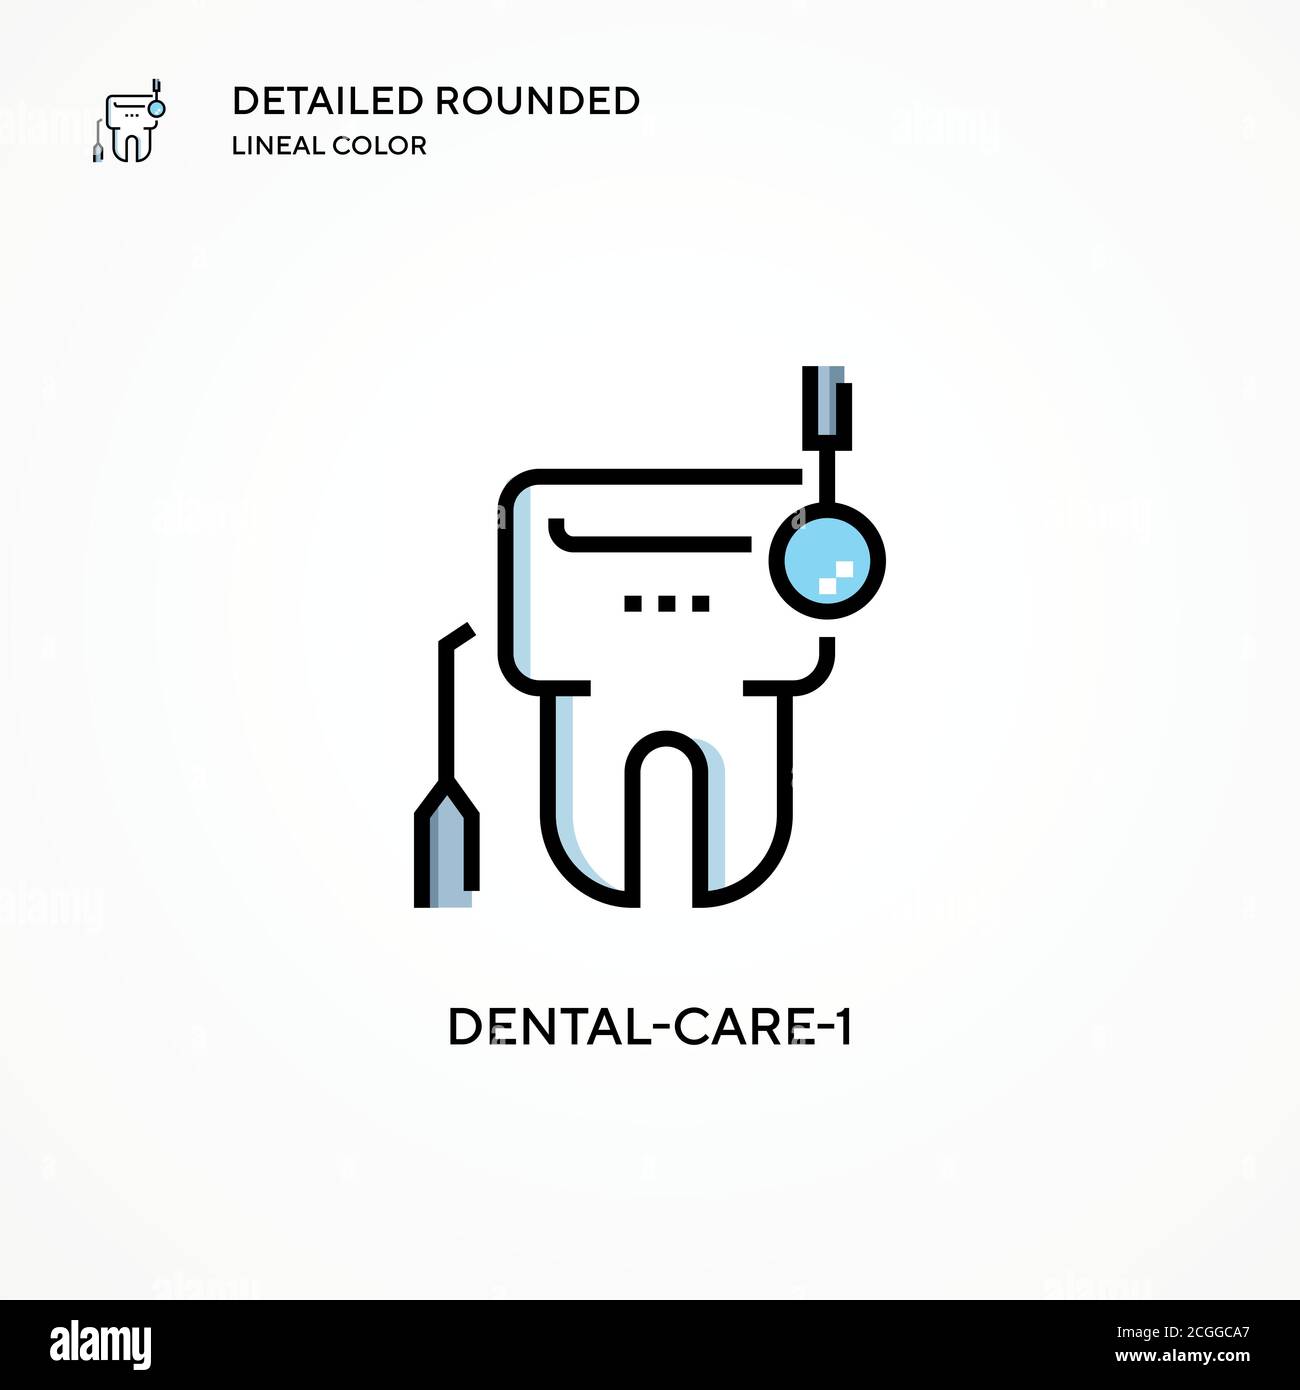 Dental-care-1 vector icon. Modern vector illustration concepts. Easy to edit and customize. Stock Vector